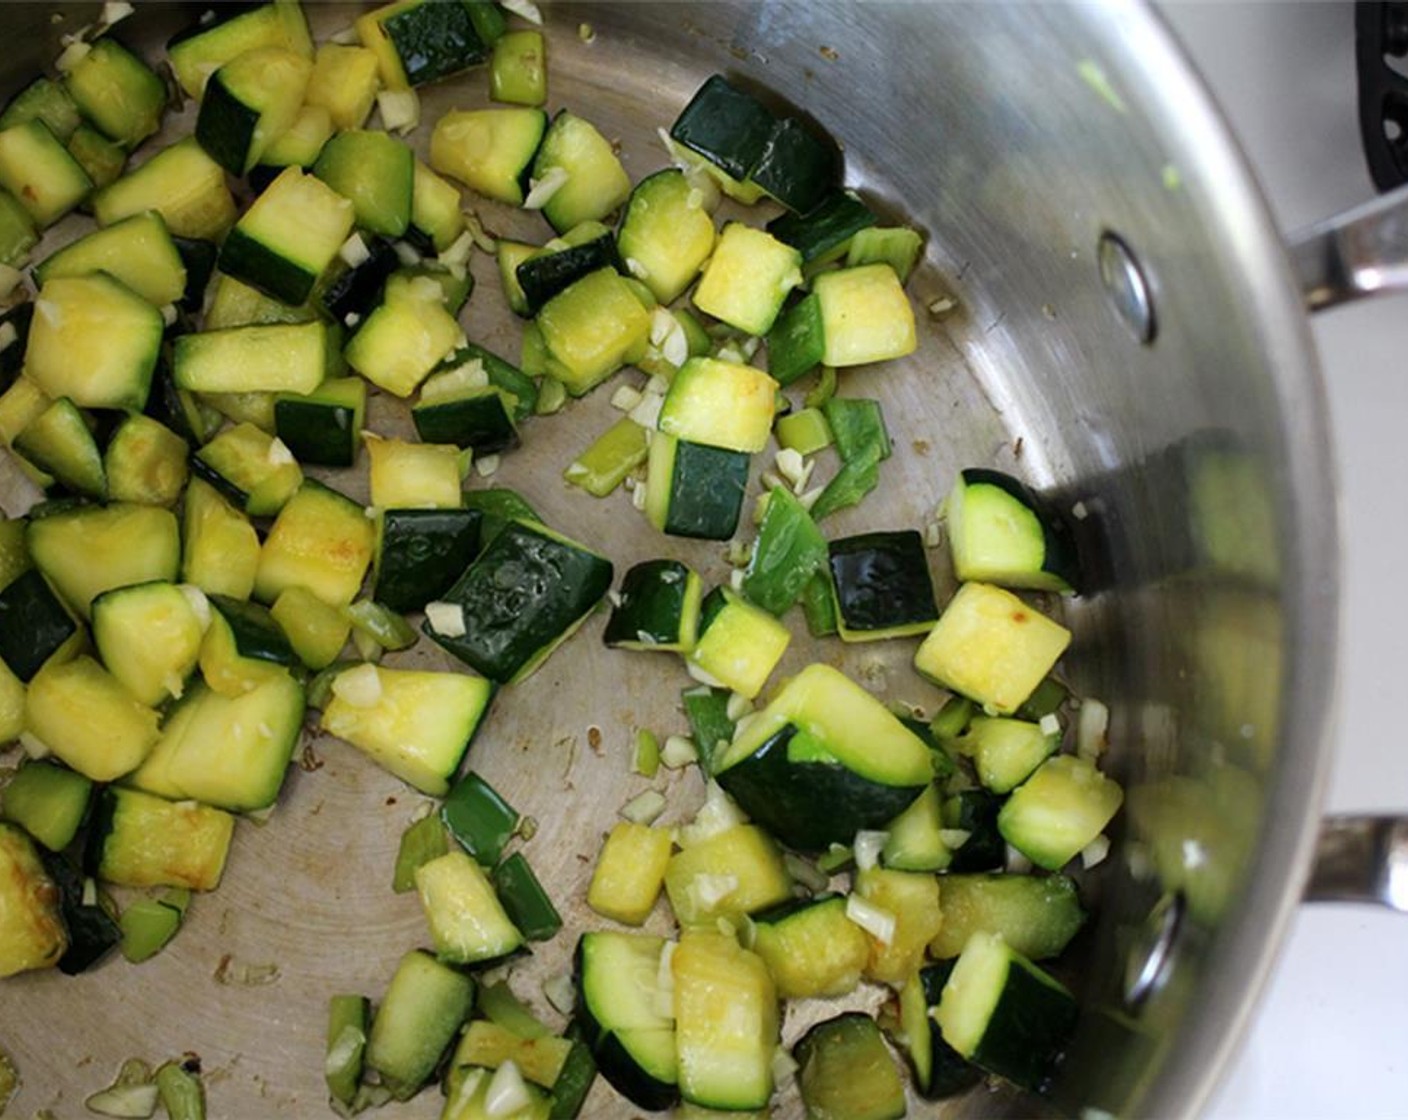 step 1 Roughly chop the Summer Squash (2 cups). Heat a soup pot over medium-low. Add Olive Oil (1 Tbsp). Add squash and Salt (to taste). Cook for 5 minutes, stirring occasionally.